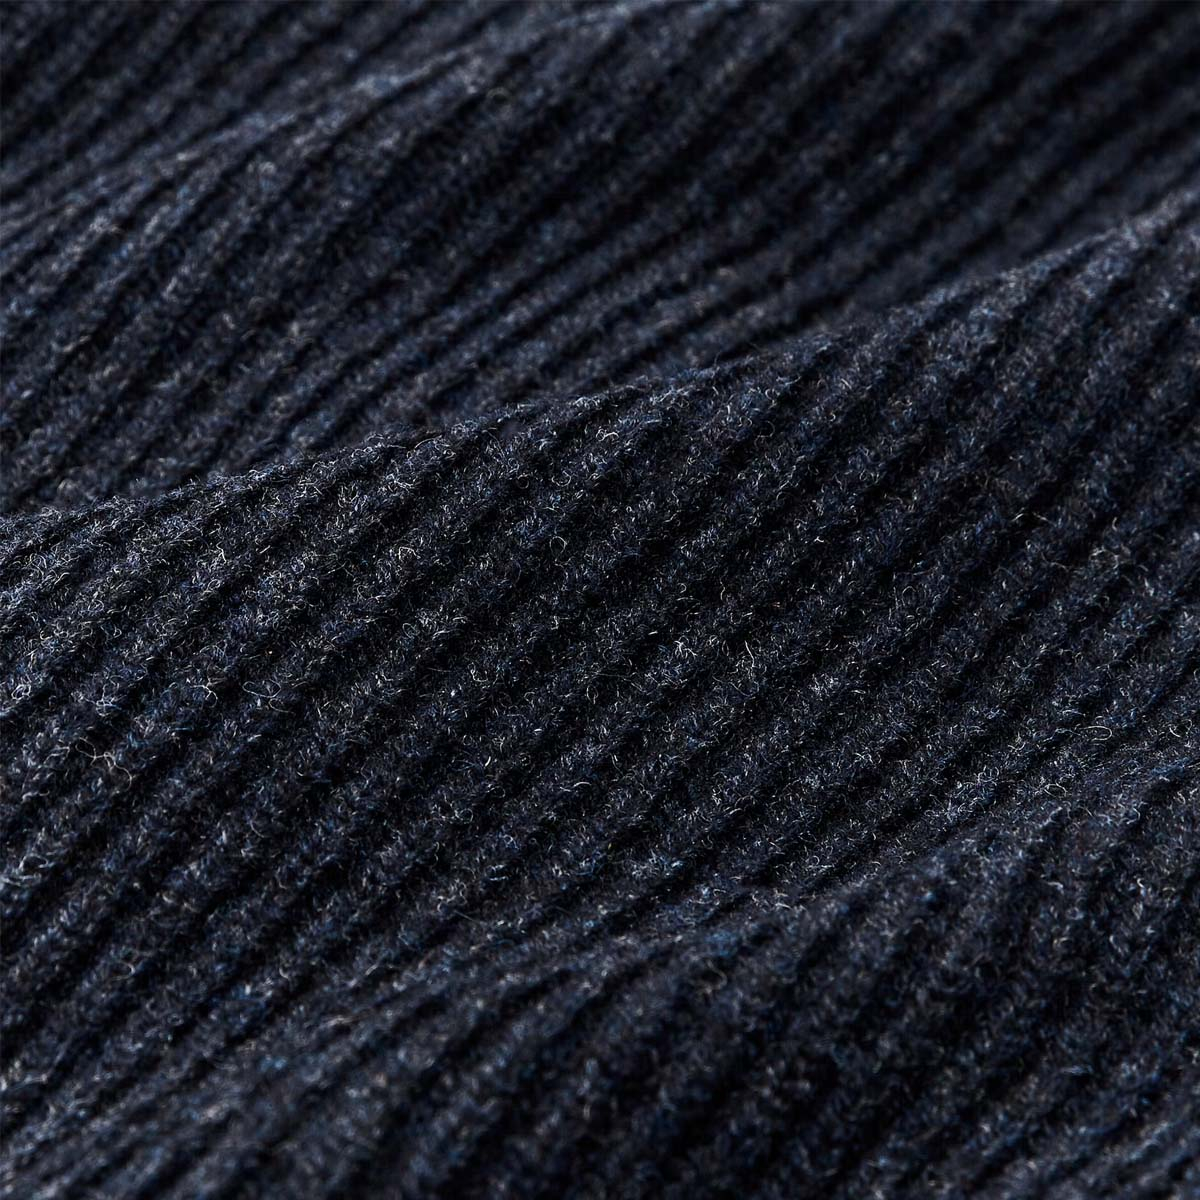 Filson Bristol Roll Neck Sweater Dark Navy Heather, is crafted in Italy with 100% wool